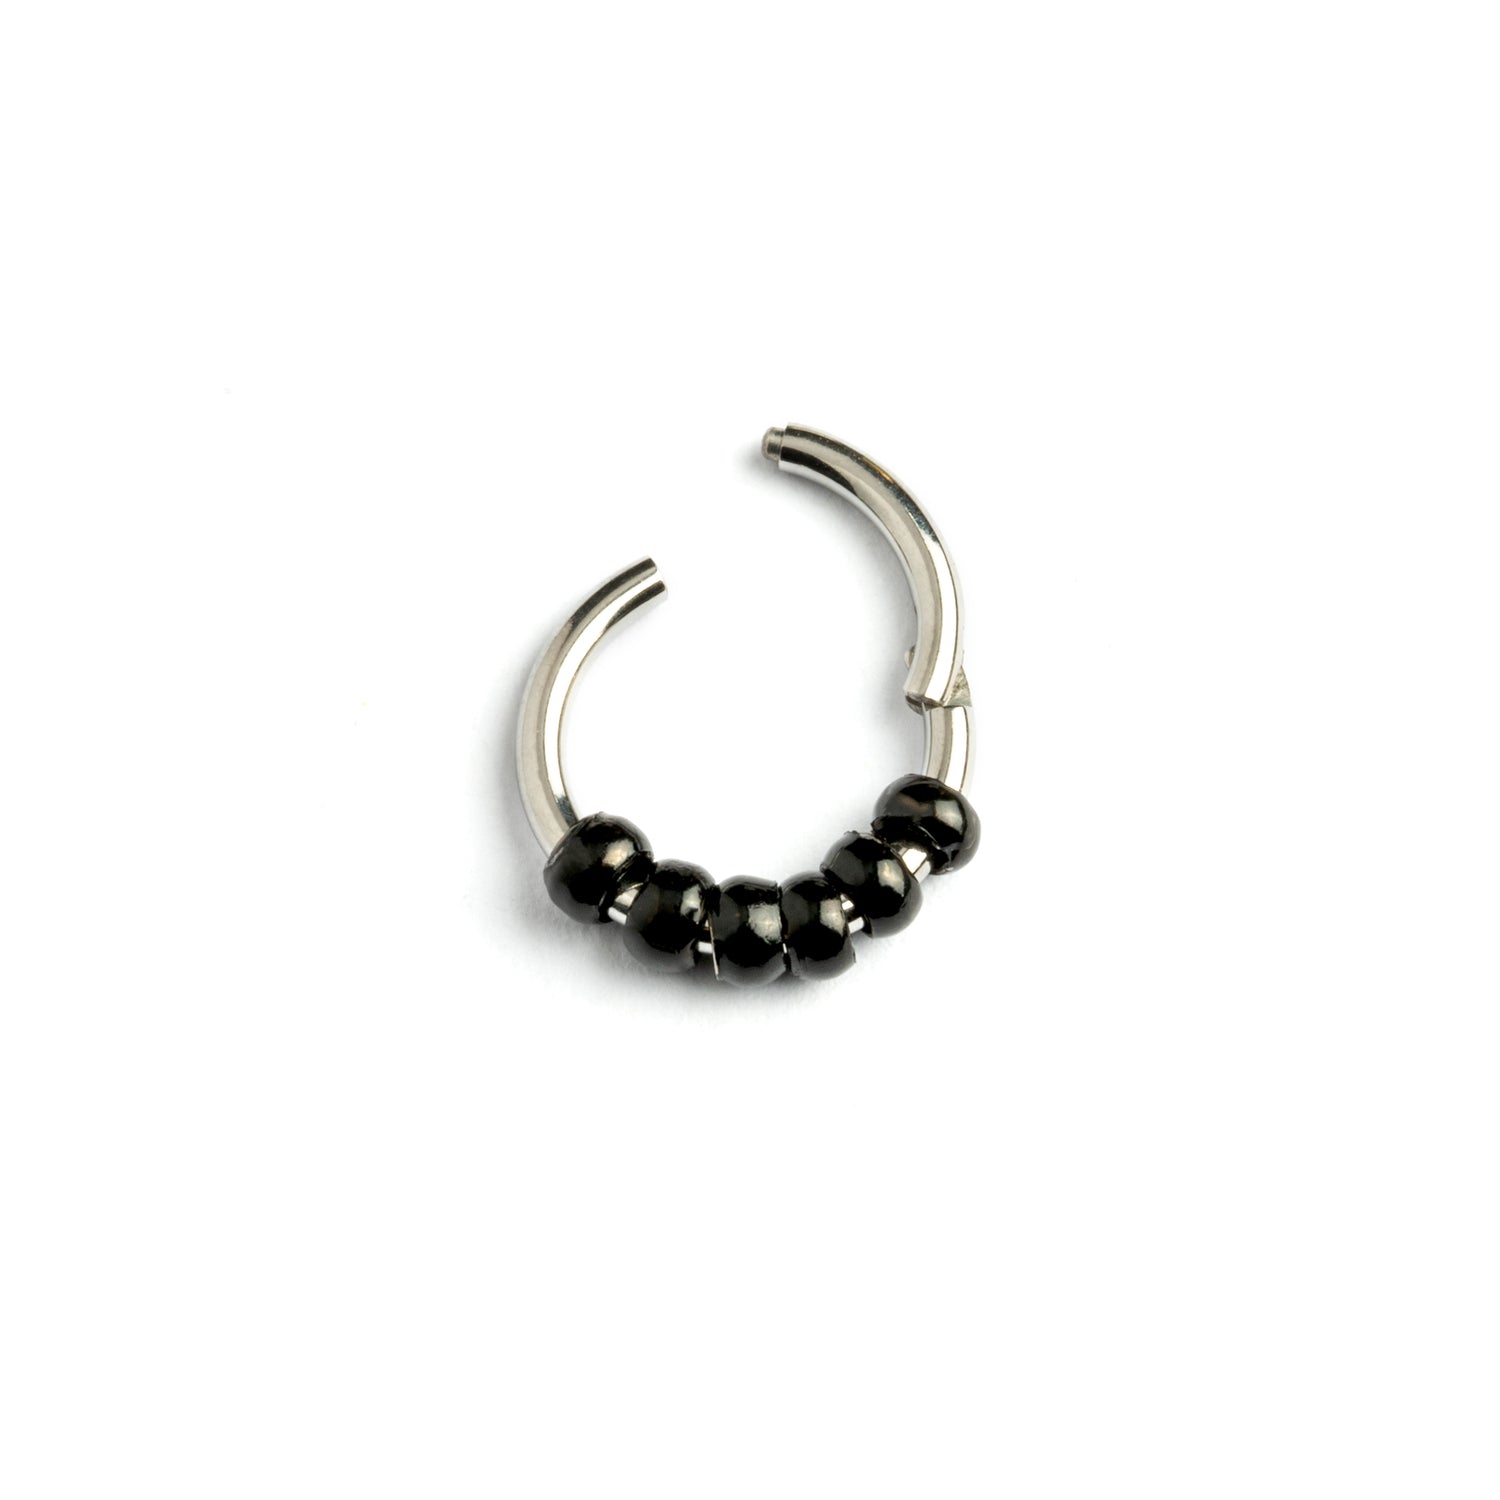 Hinged Segment Ring with Black Beads click on view